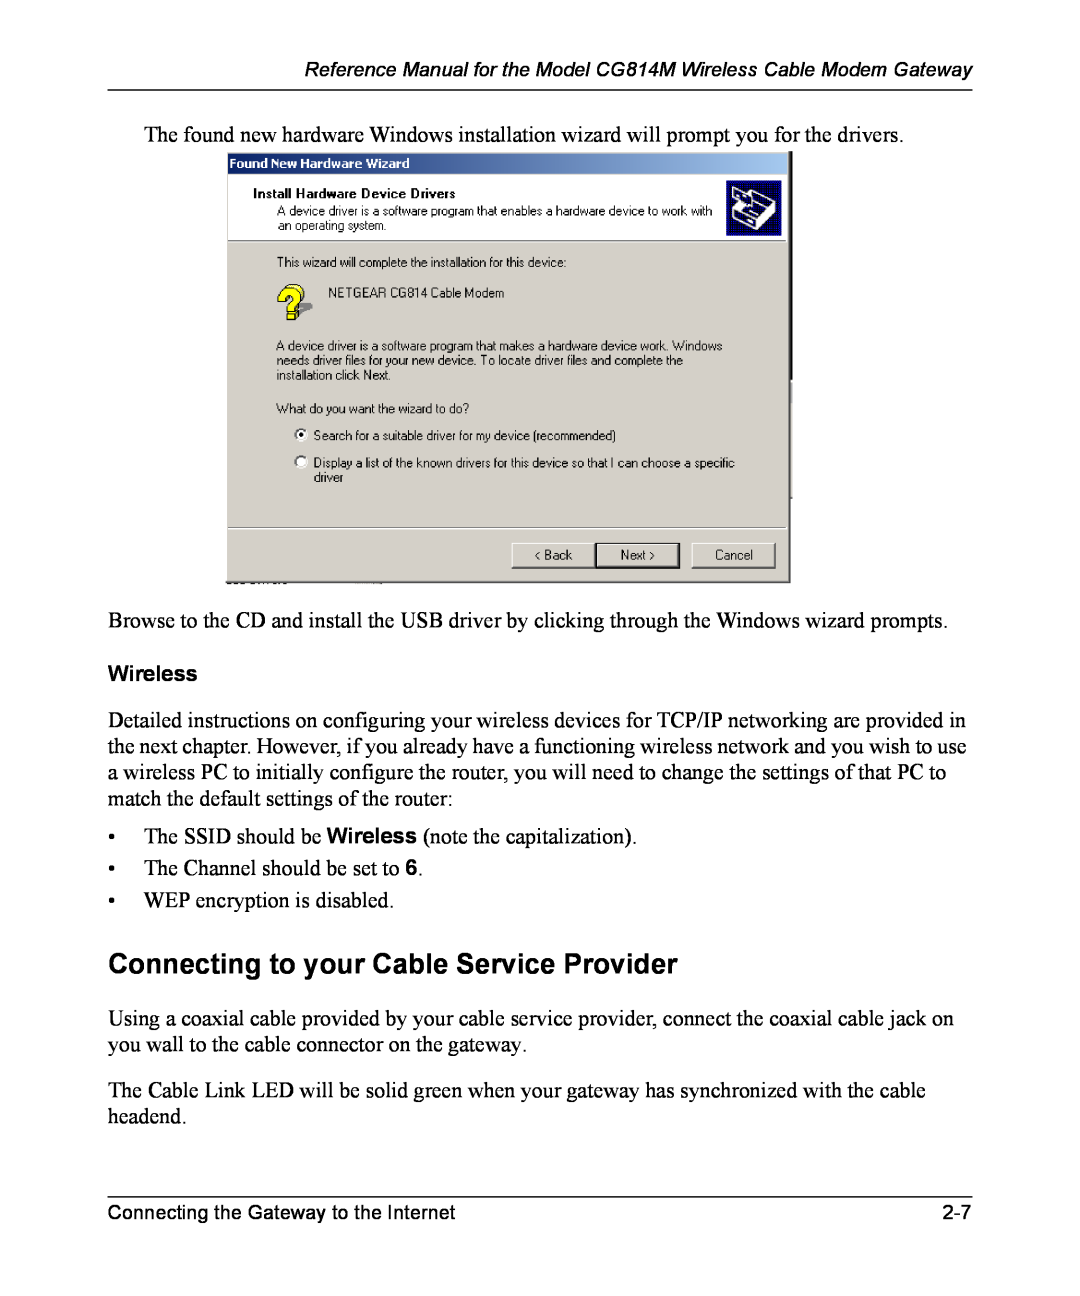 NETGEAR CG814M manual Connecting to your Cable Service Provider, Wireless 